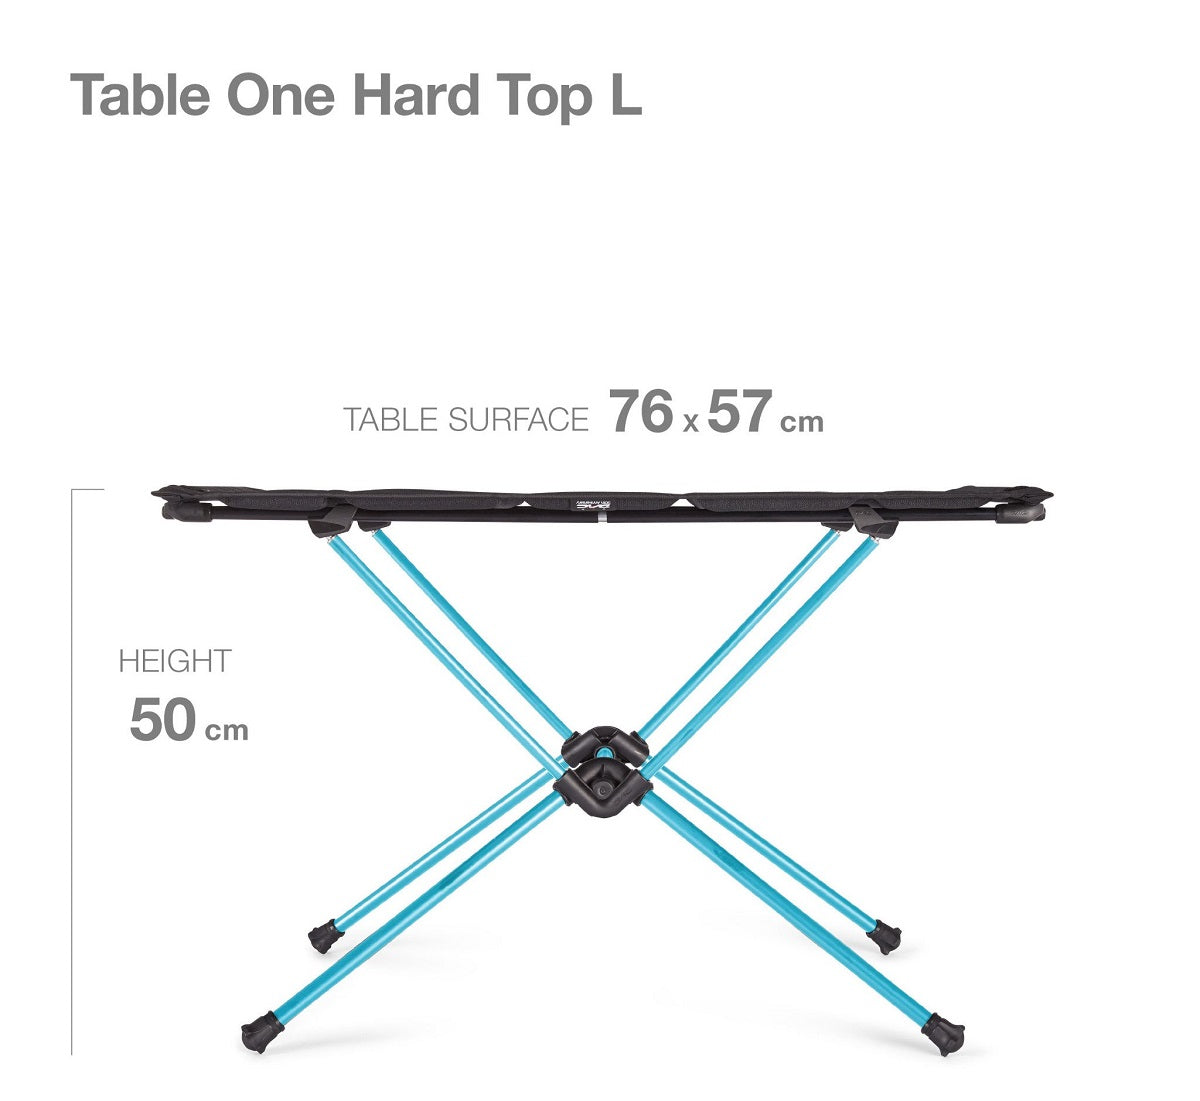 Helinox Table One Hard Top Large overview